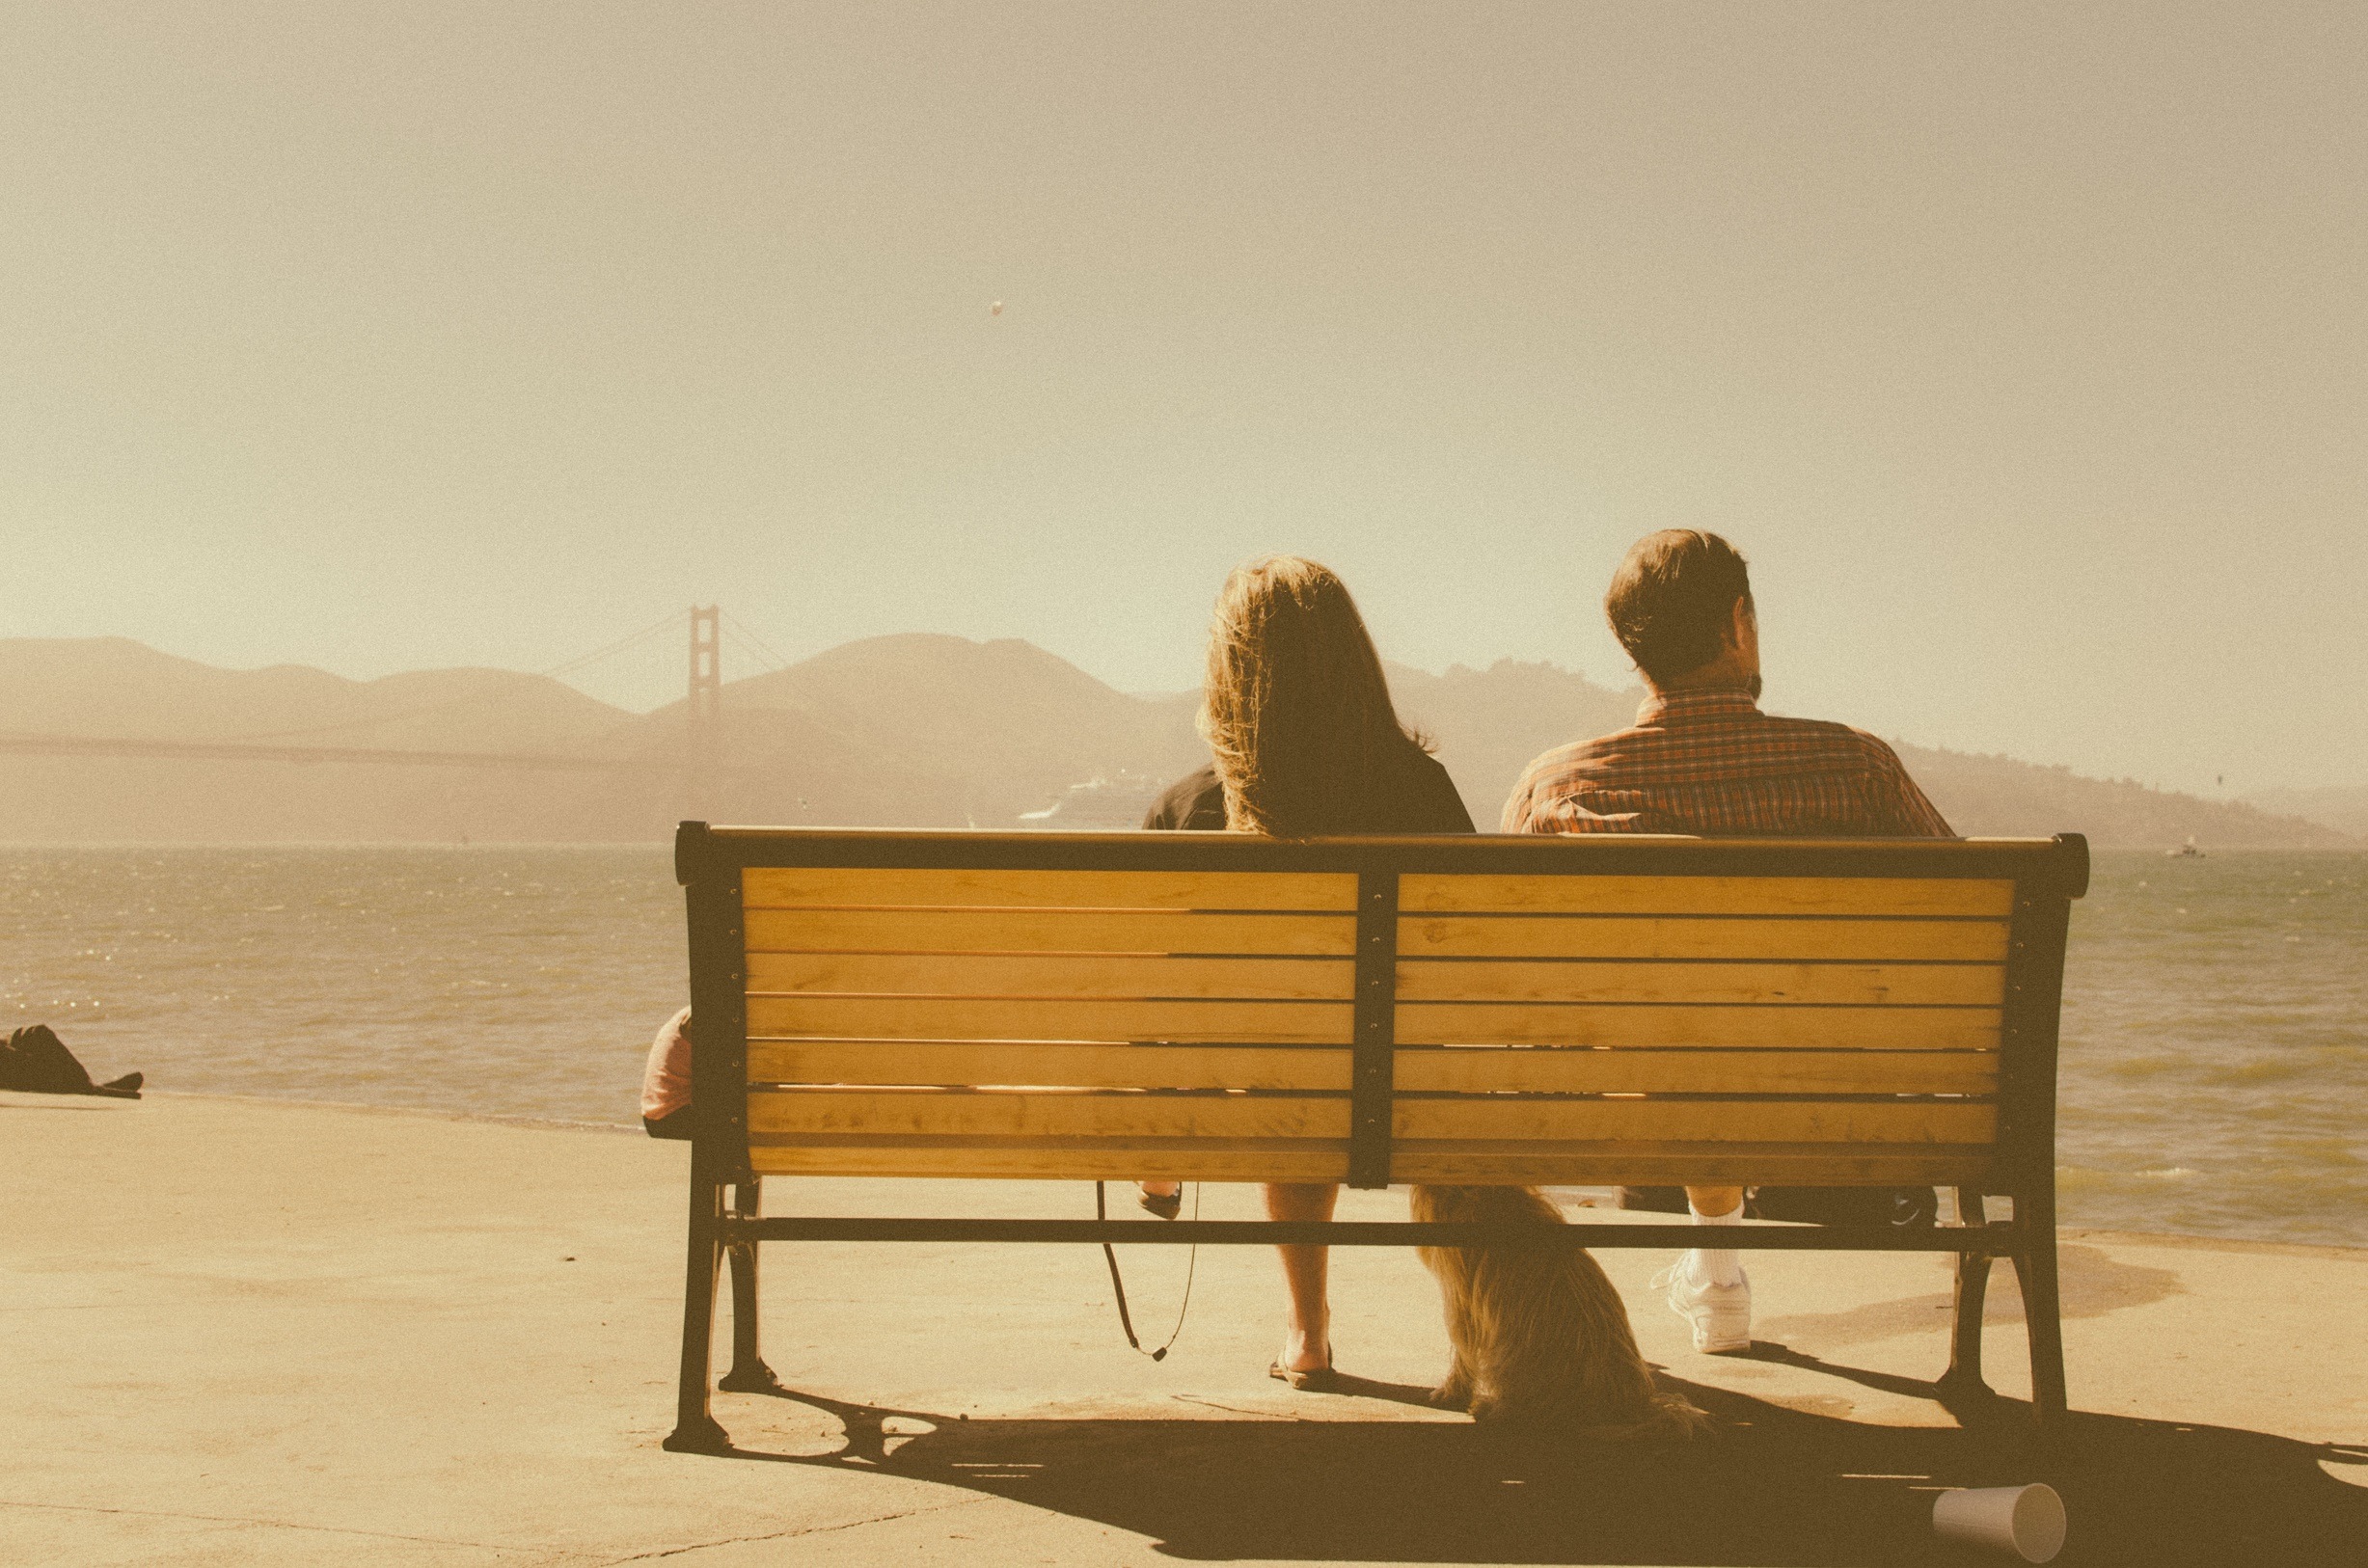 40 Small Things Couples Find Great Happiness In